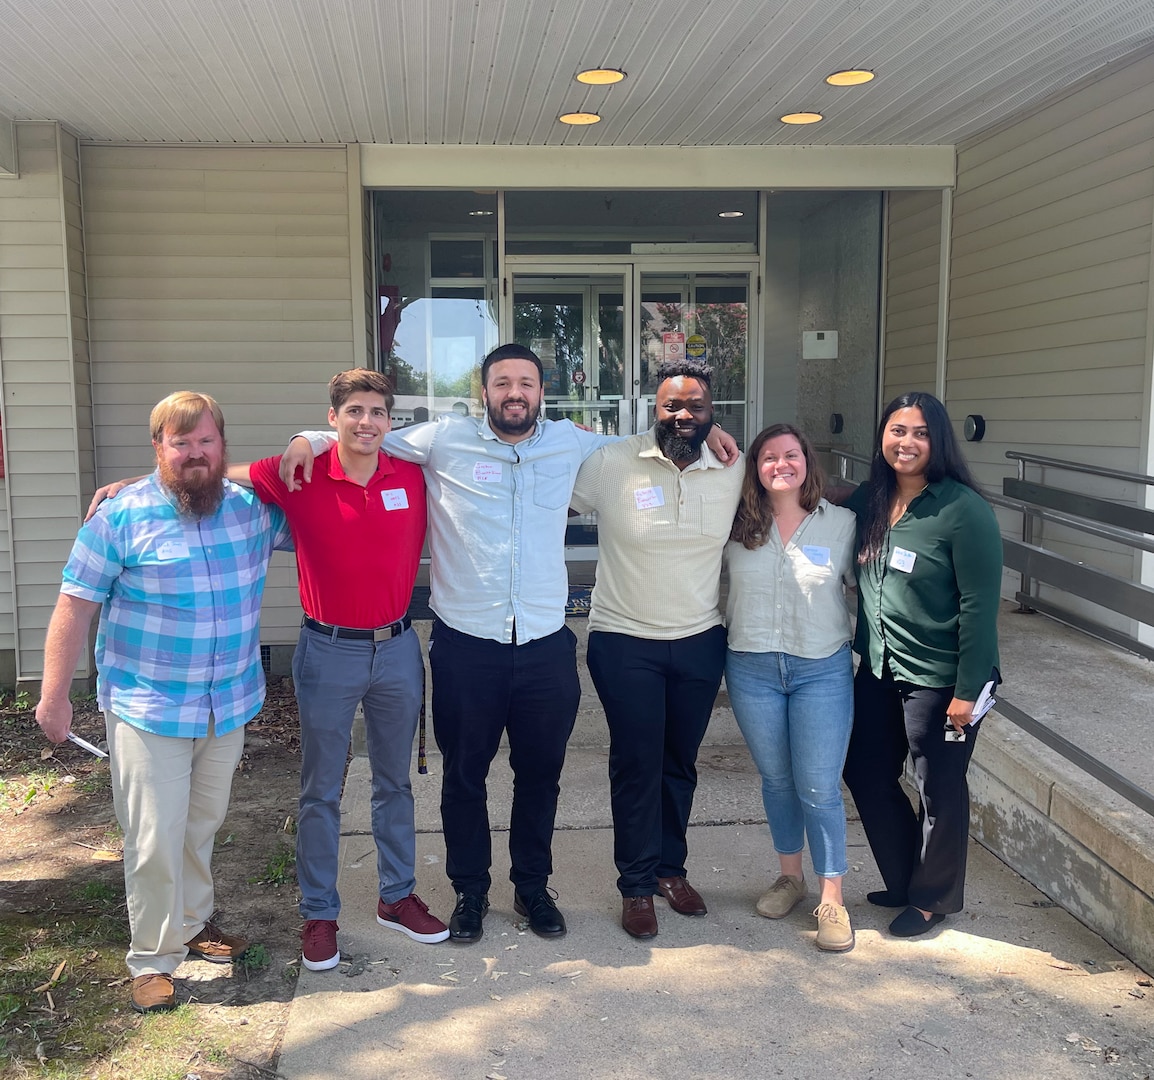 IMAGE: The Early Career Organization Team has a passion for bringing like-minded individuals together and creating a space to learn more about what Naval Surface Warfare Center Dahlgren Division has to offer and to collaborate with your peers on ideas. (Left to right: Nicholas Jones, Will Jones, Joshua Bonilla, Carissa Hardey, Eikra Shithil)